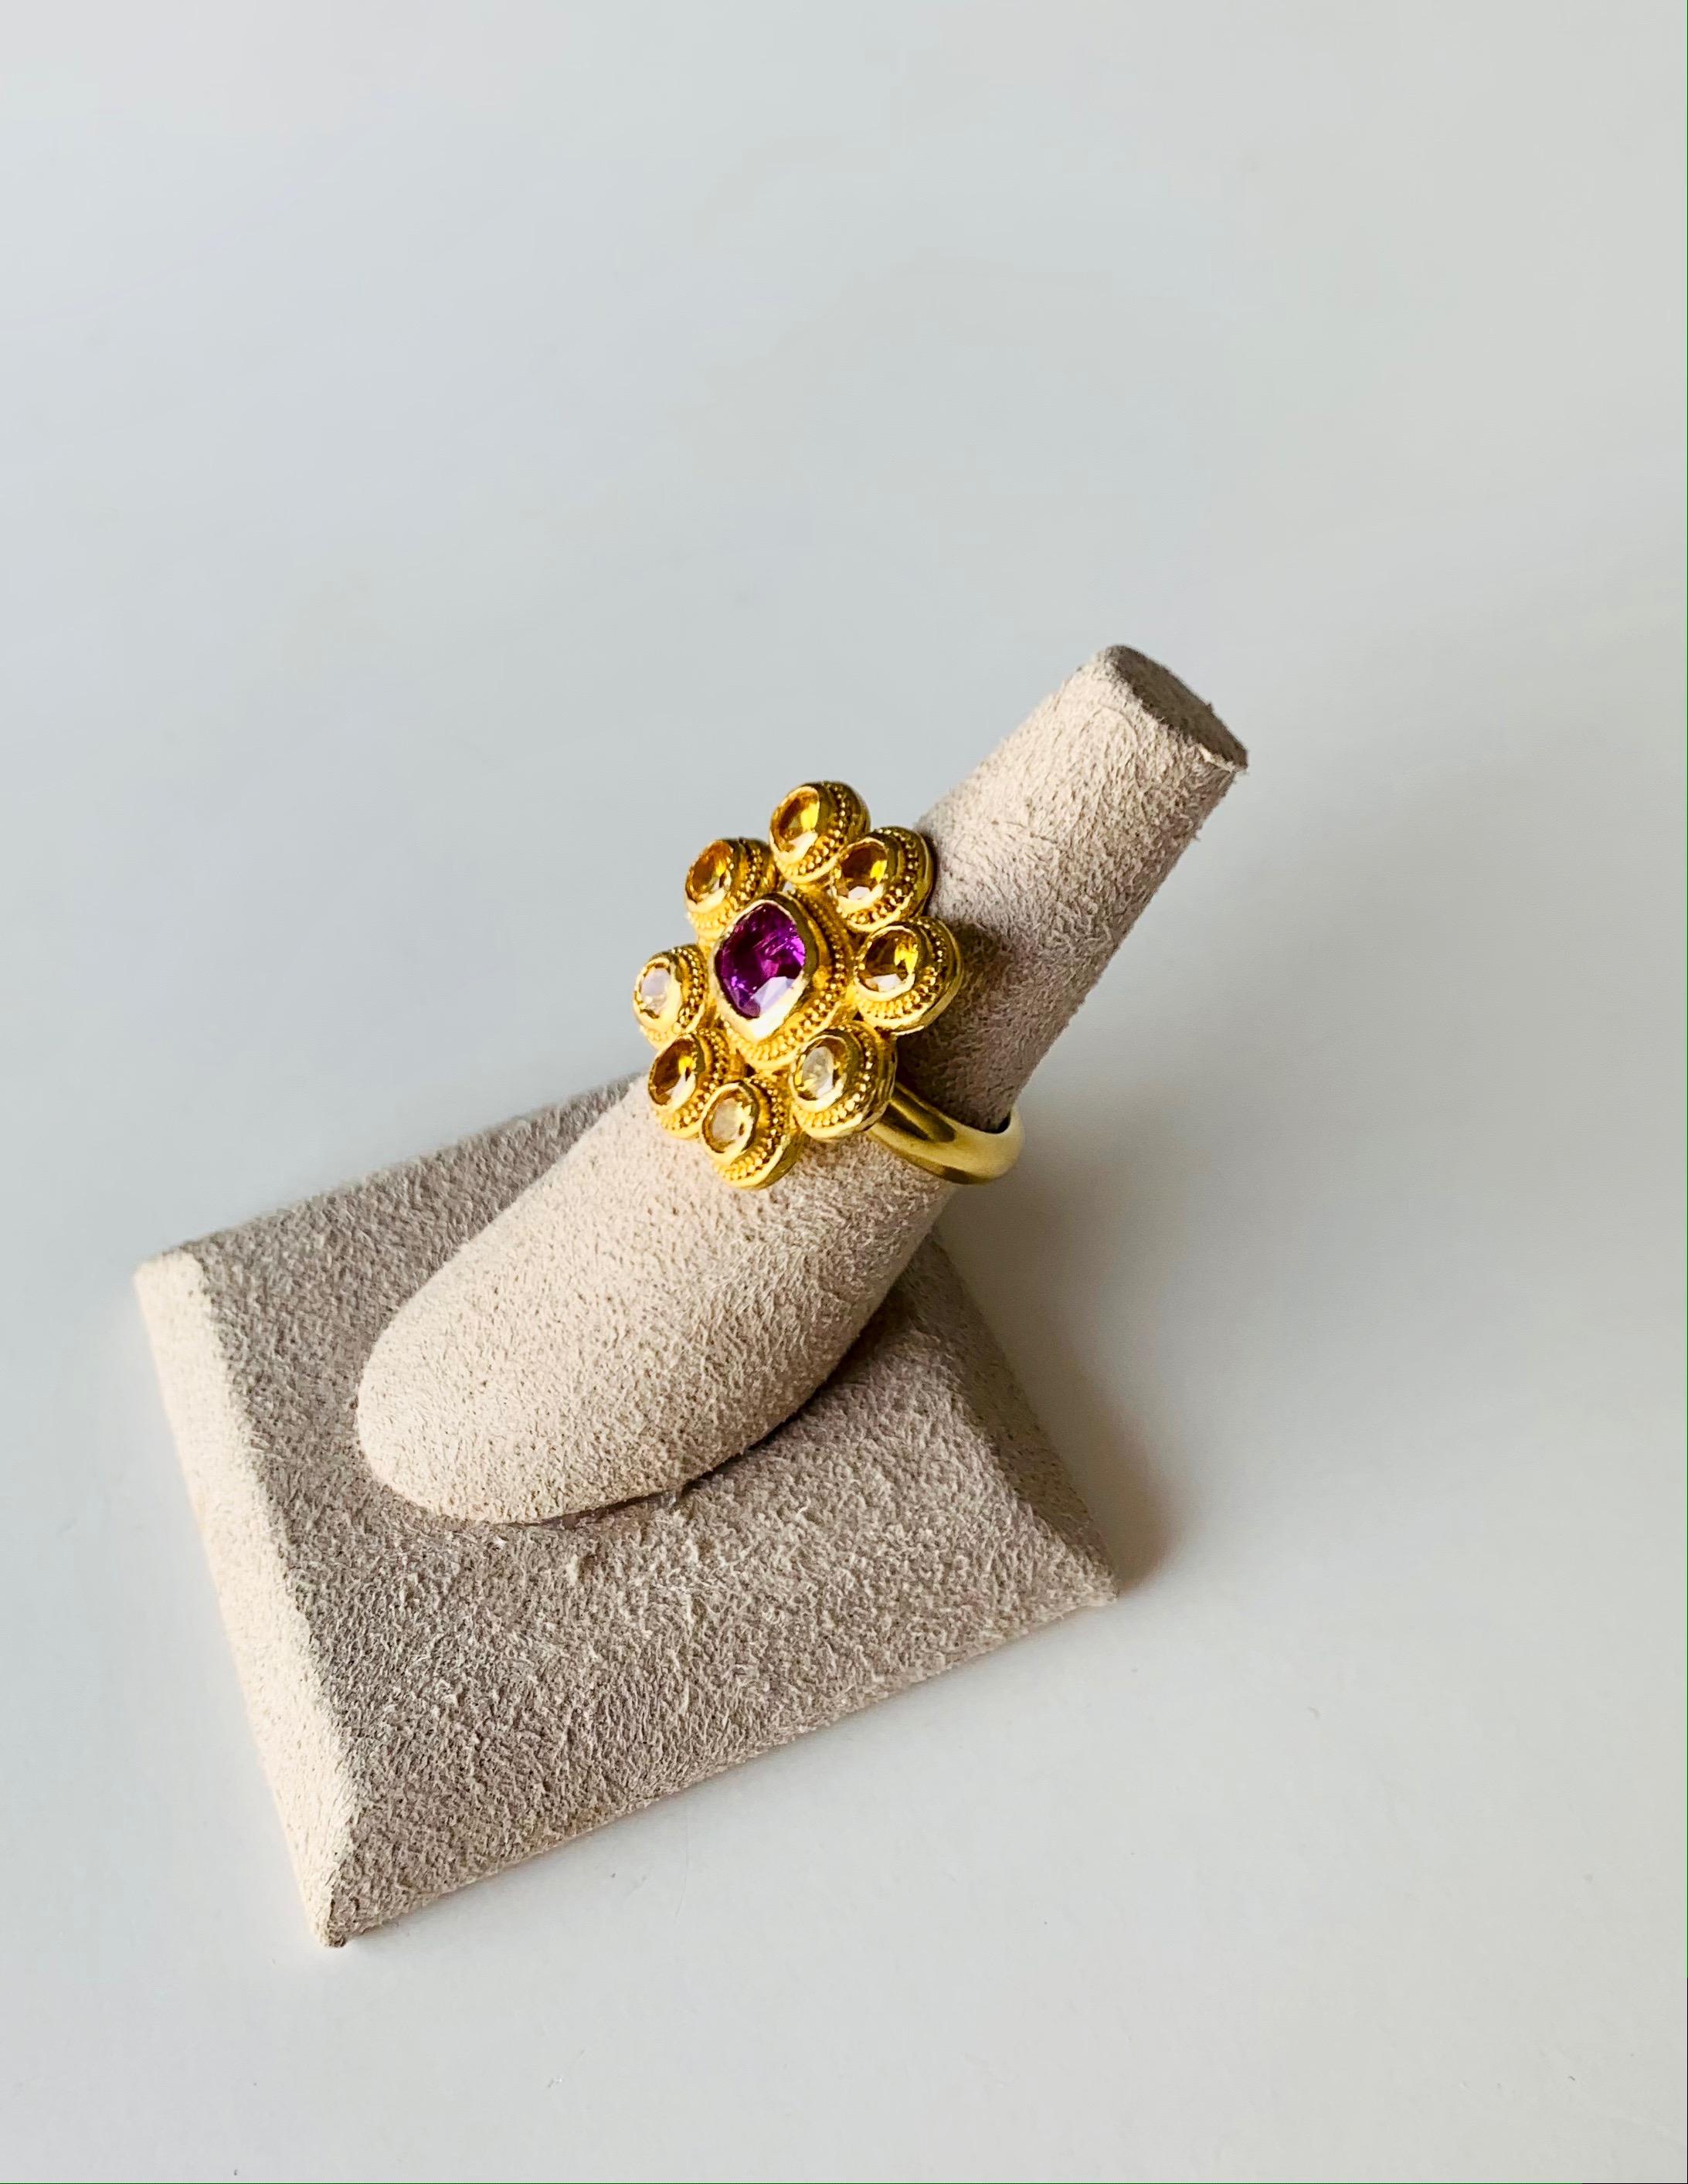 This brightly colored fancy yellow and pink Sapphire cocktail ring will add sparkle to any occasion and outfit .
the stones are set in 22 Karat gold with granulation detailing .
It is entirely handcrafted by the artist in her New York studio. Size